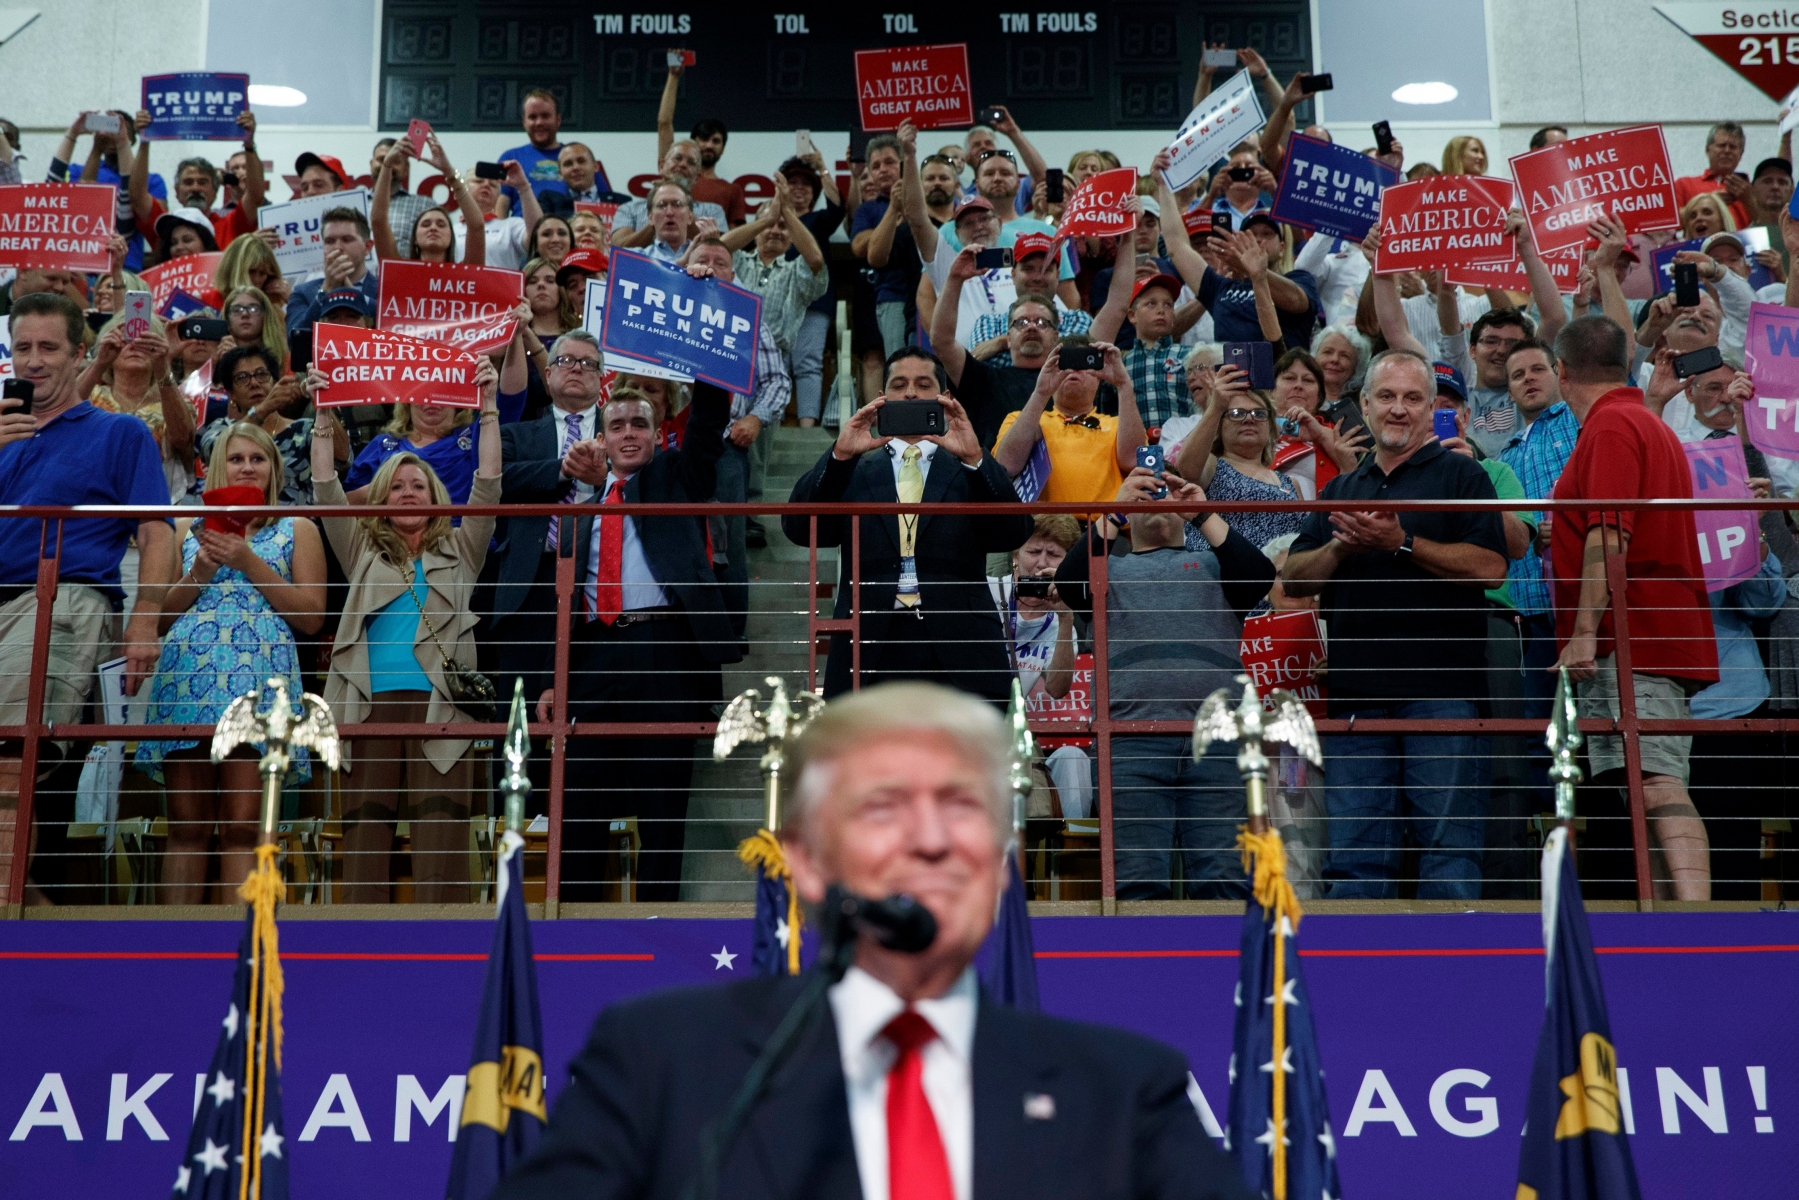 Supporters of Republican presidential candidate Donald Trump cheer as he speaks during a rally, Monday, Sept. 12, 2016, in Asheville, N.C. (AP Photo/Evan Vucci) Campaign 2016 Trump